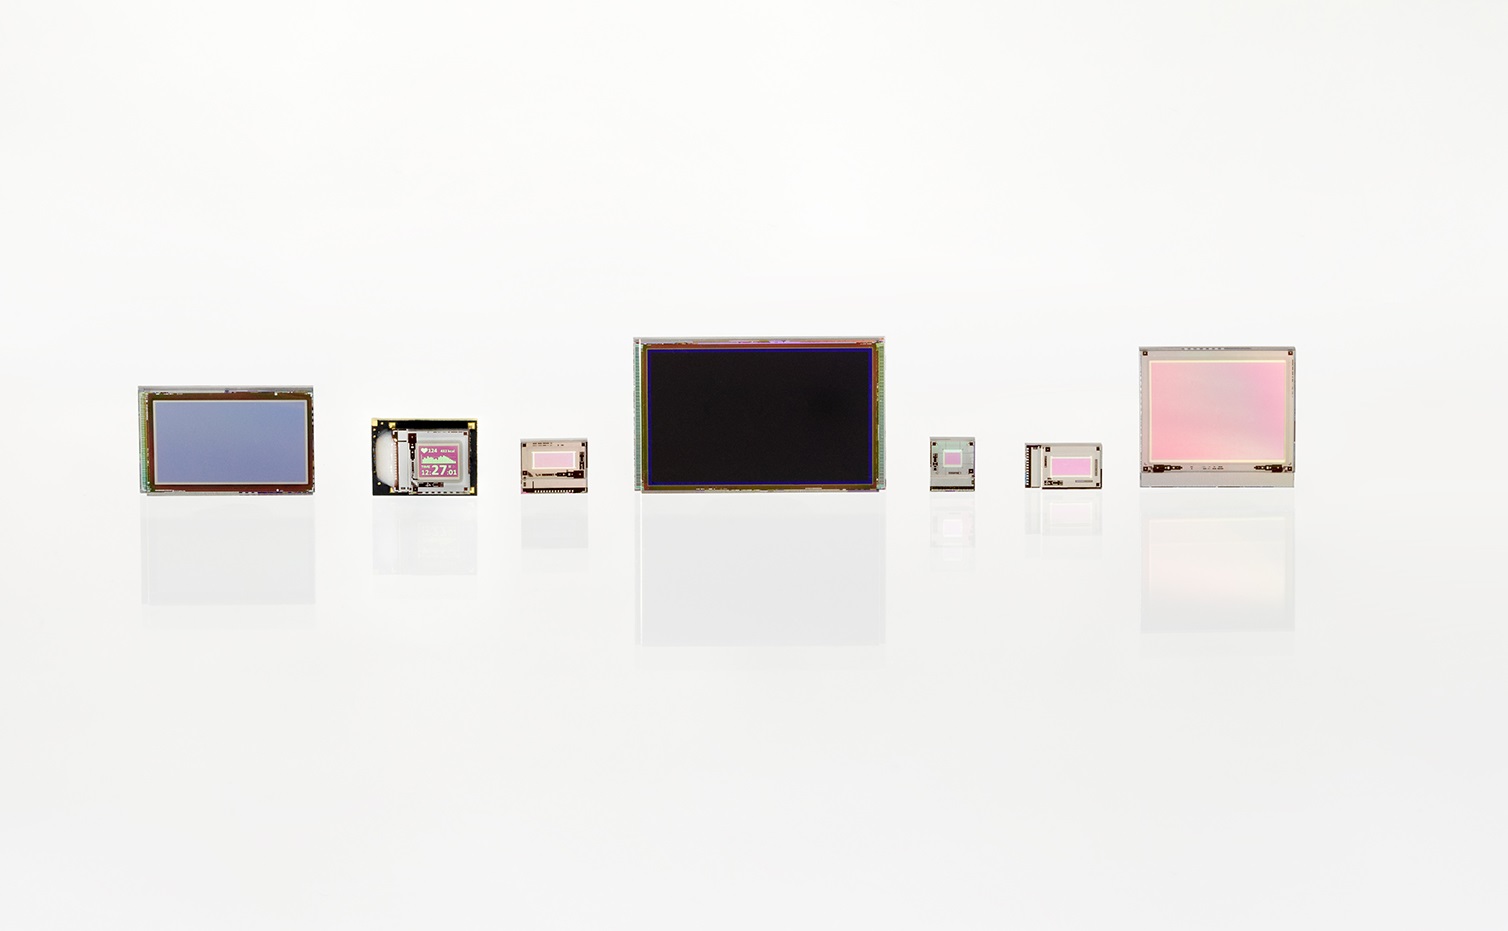 OLED microdisplays in various sizes and resolutions